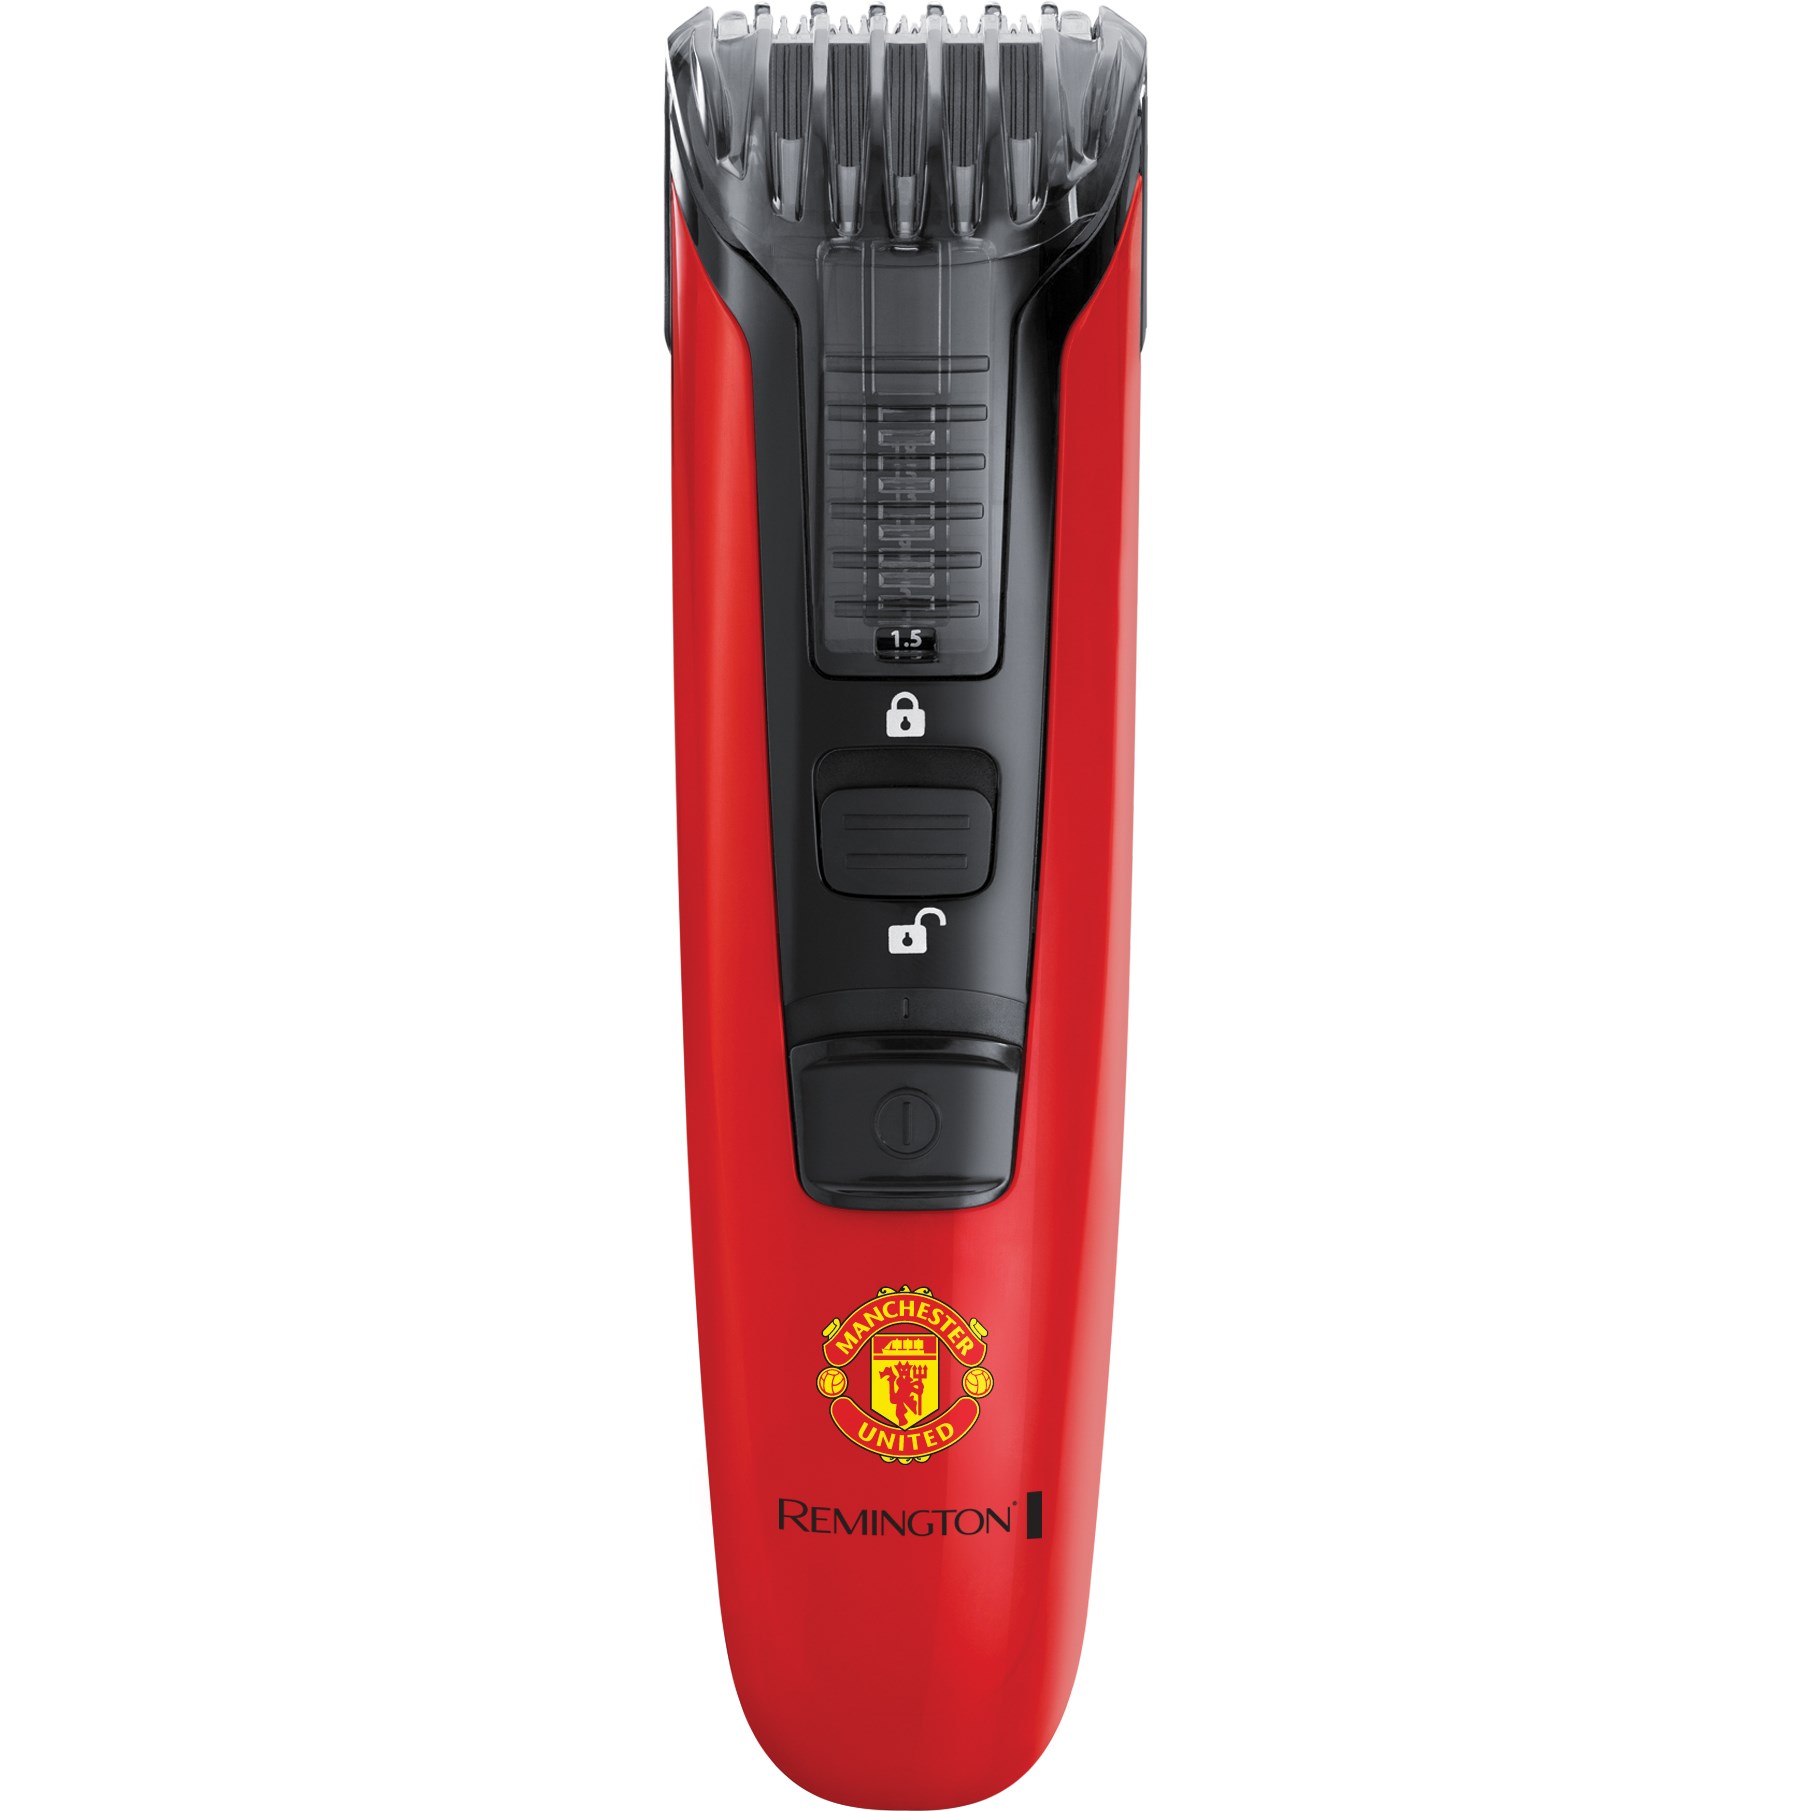 Remington Manchester United Edition Manchester United Beard Style